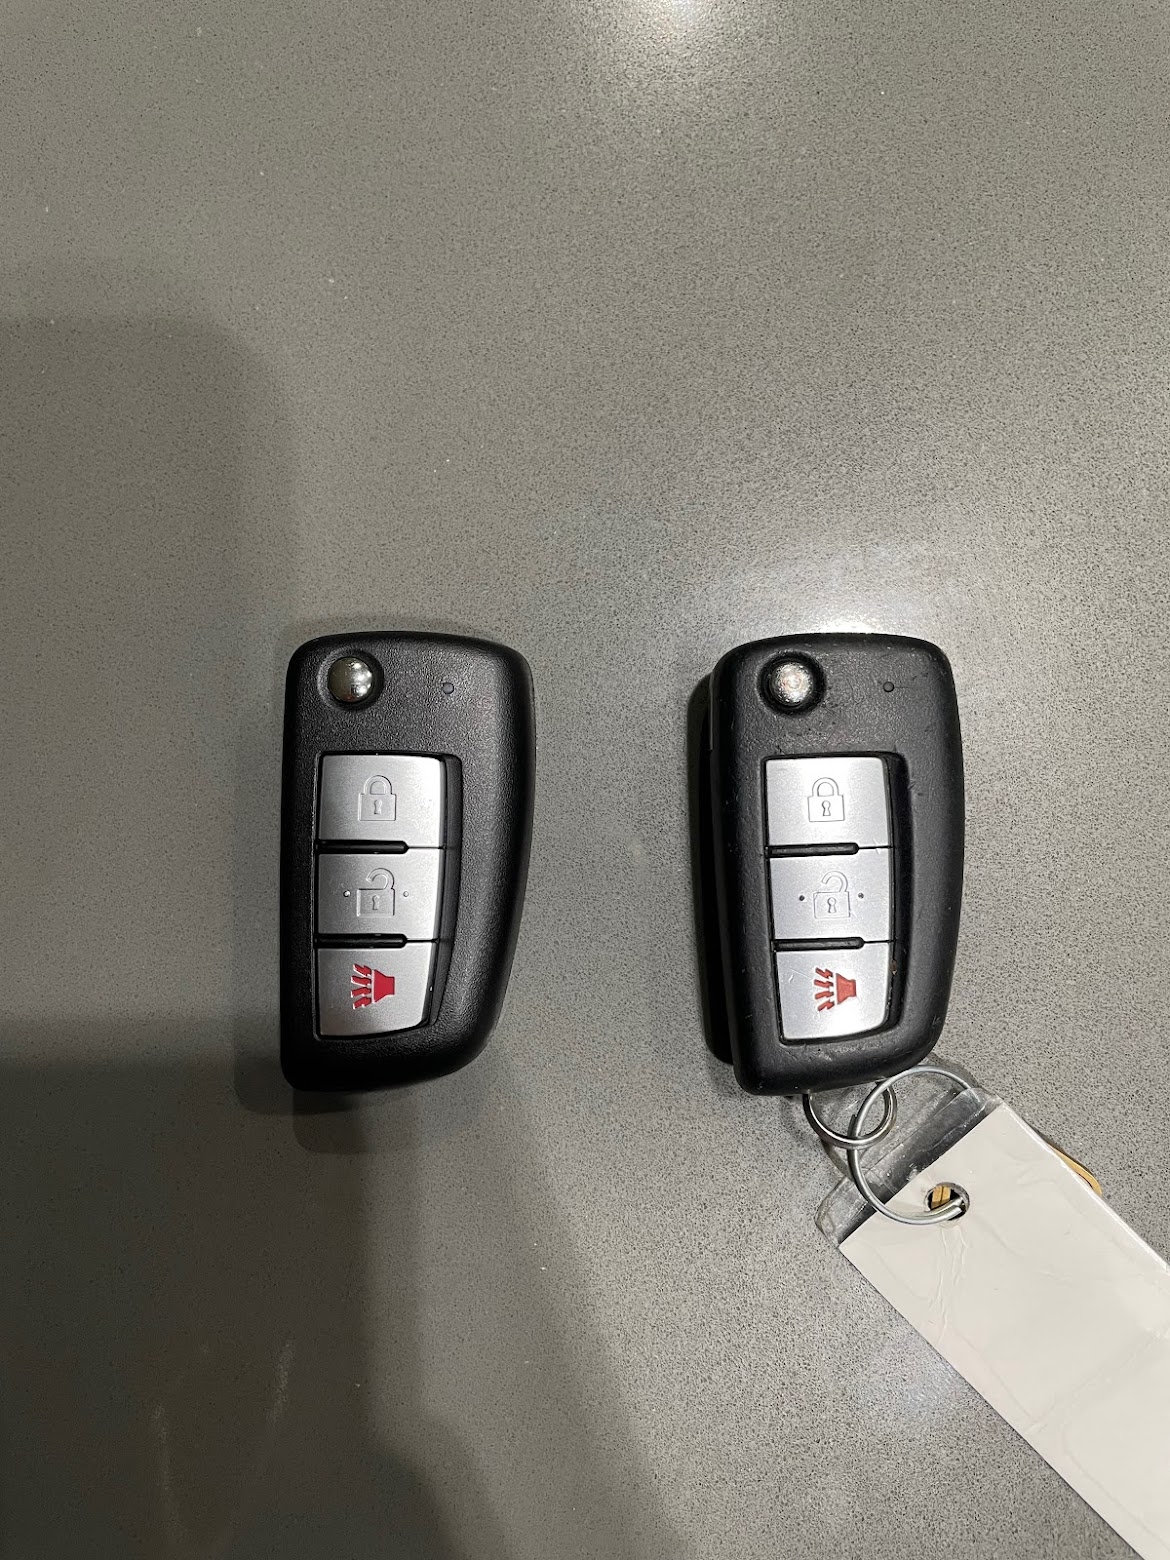 OEM KEY MADE FOR NISSAN PERFORMED IN AUSTIN TEXAS